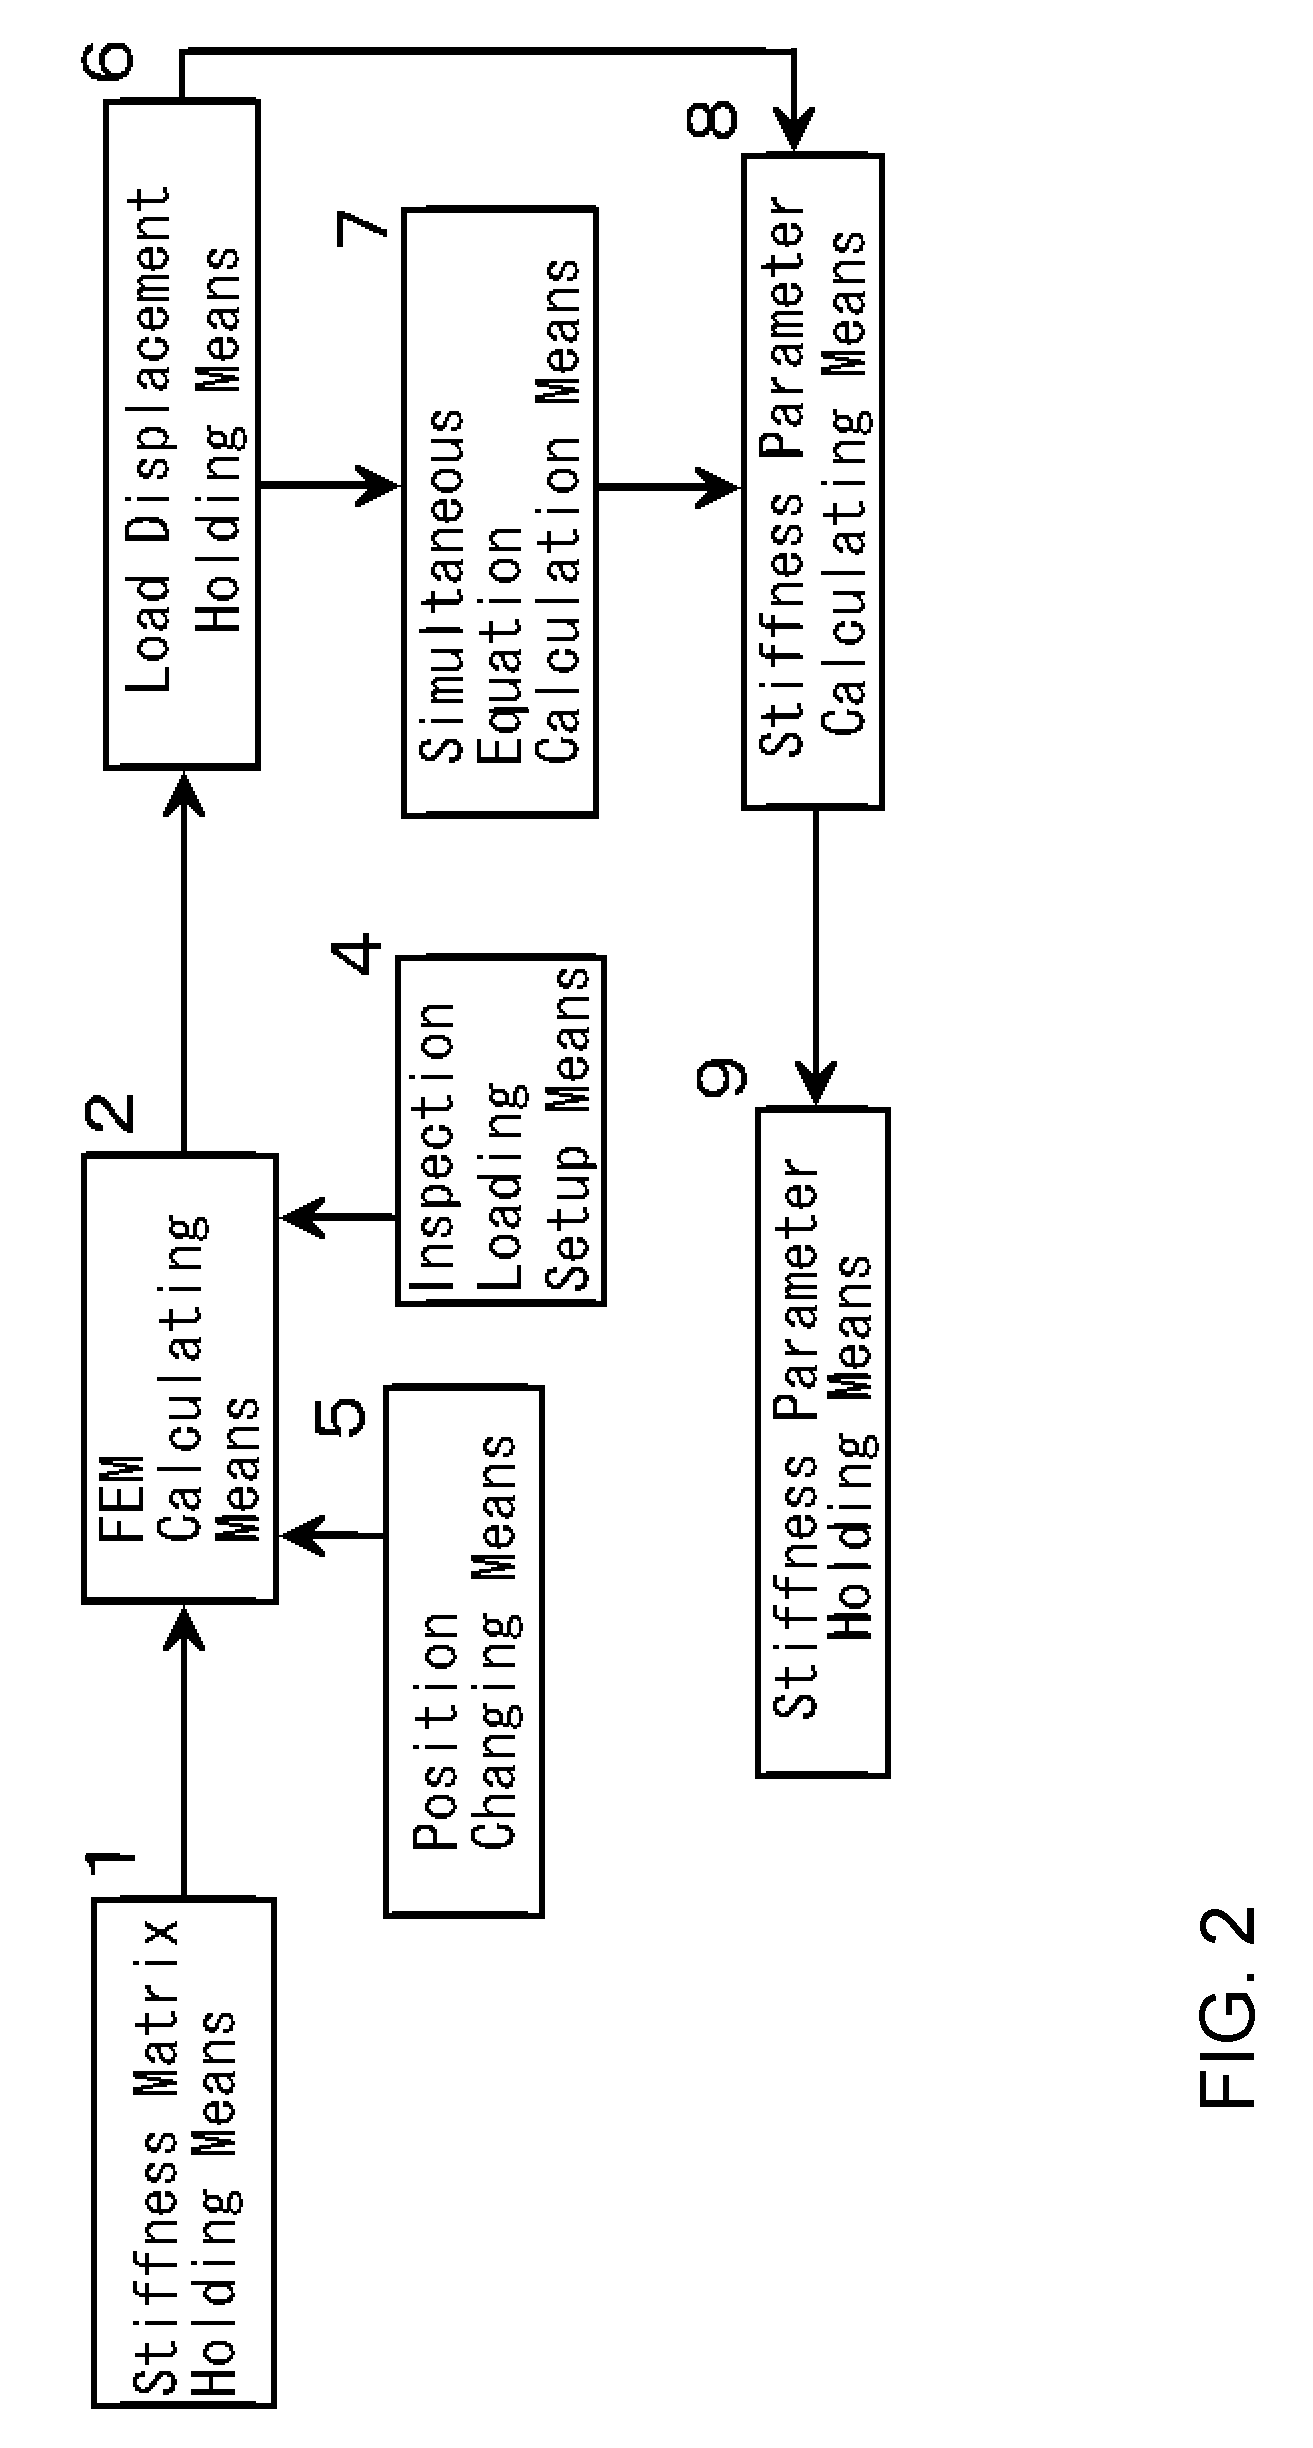 Numerical structural analysis system based on the load-transfer-path method